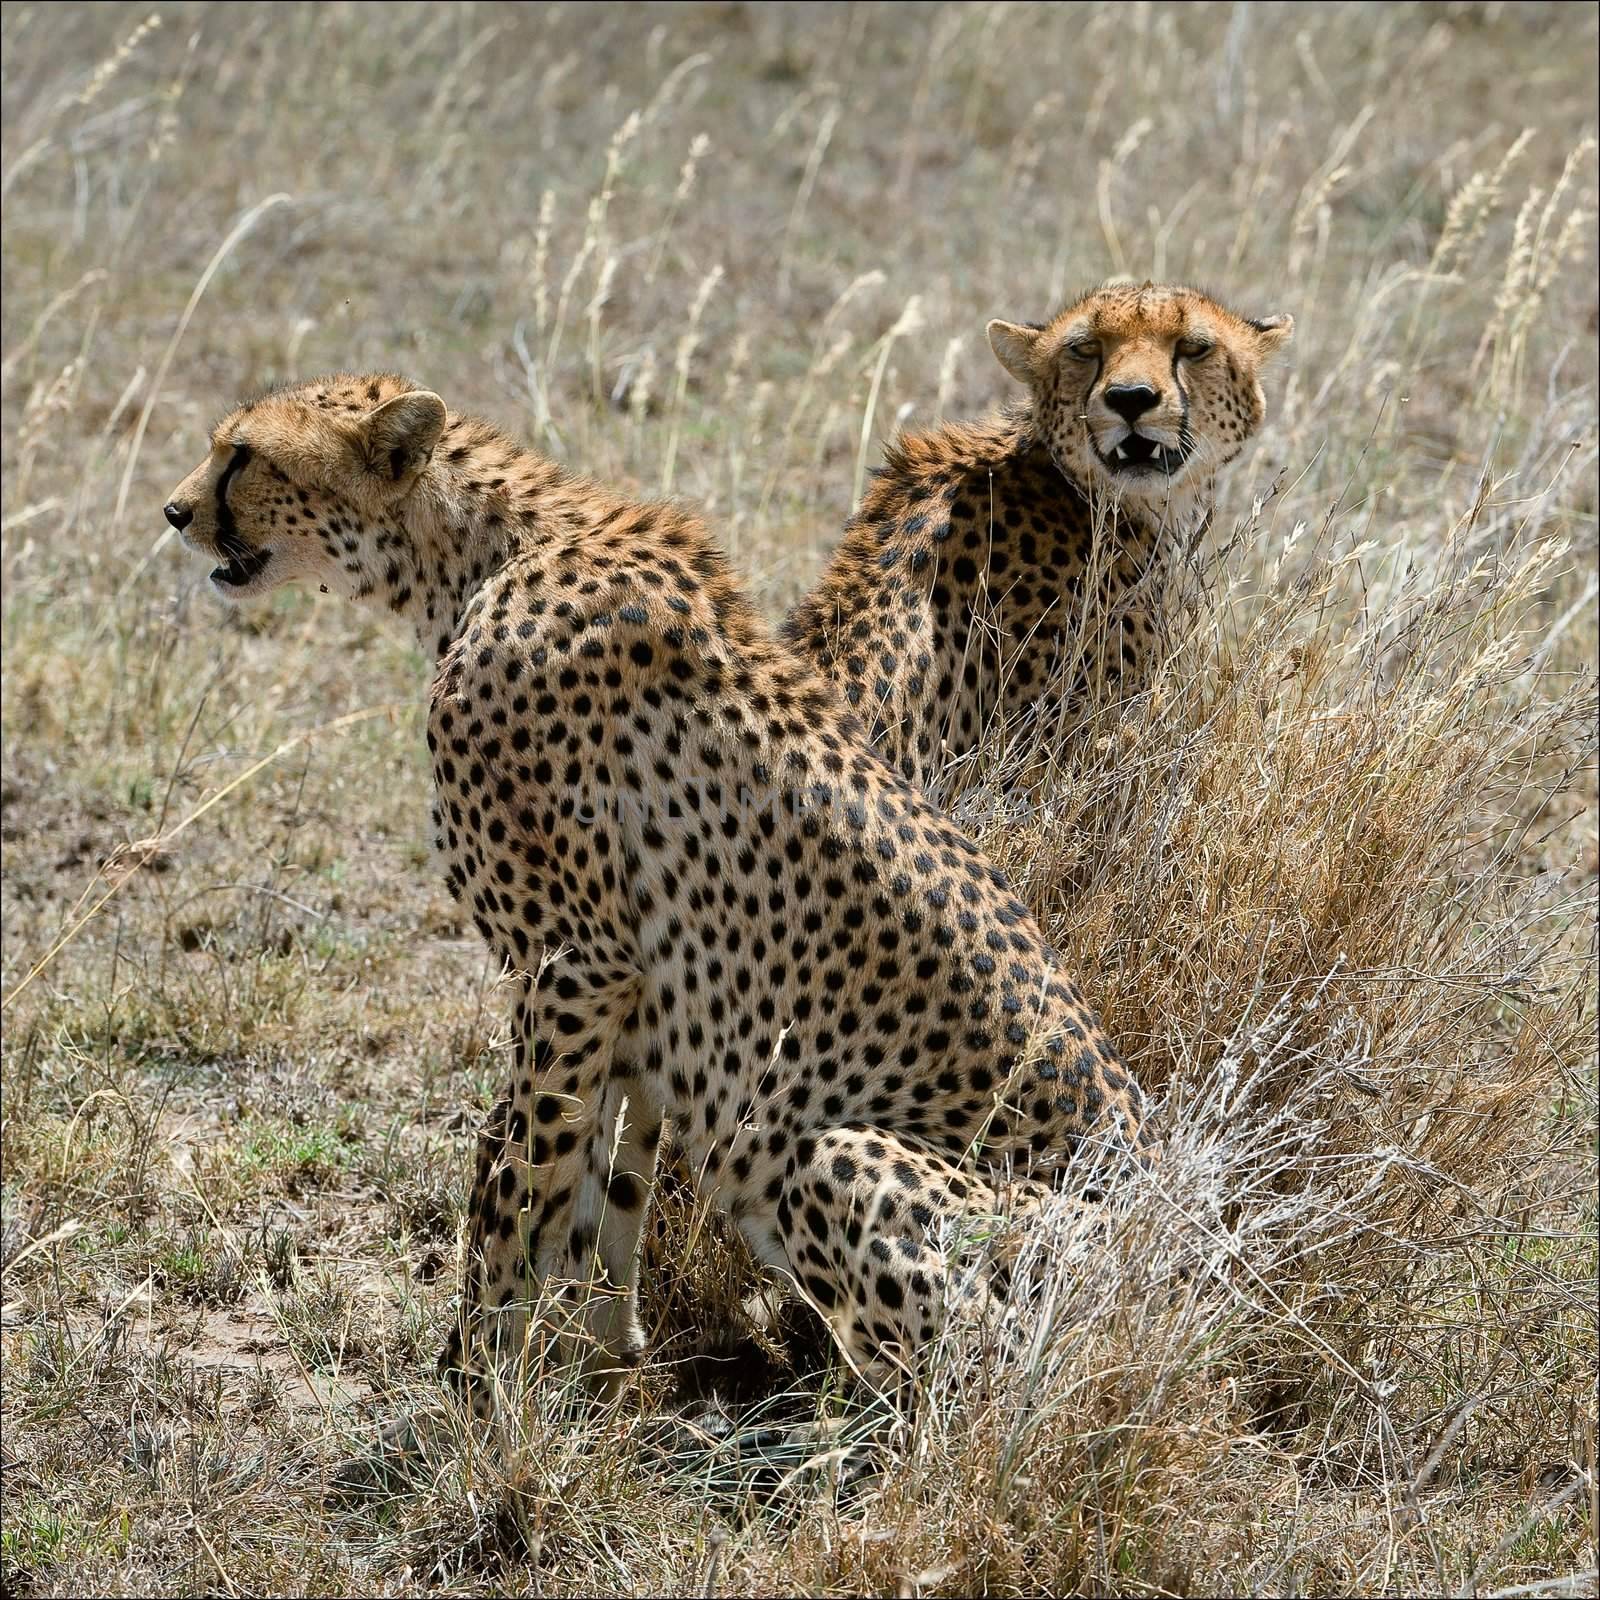 Two cheetahs in a grass. Two cheetahs sit in the grass which has turned yellow from the sun.